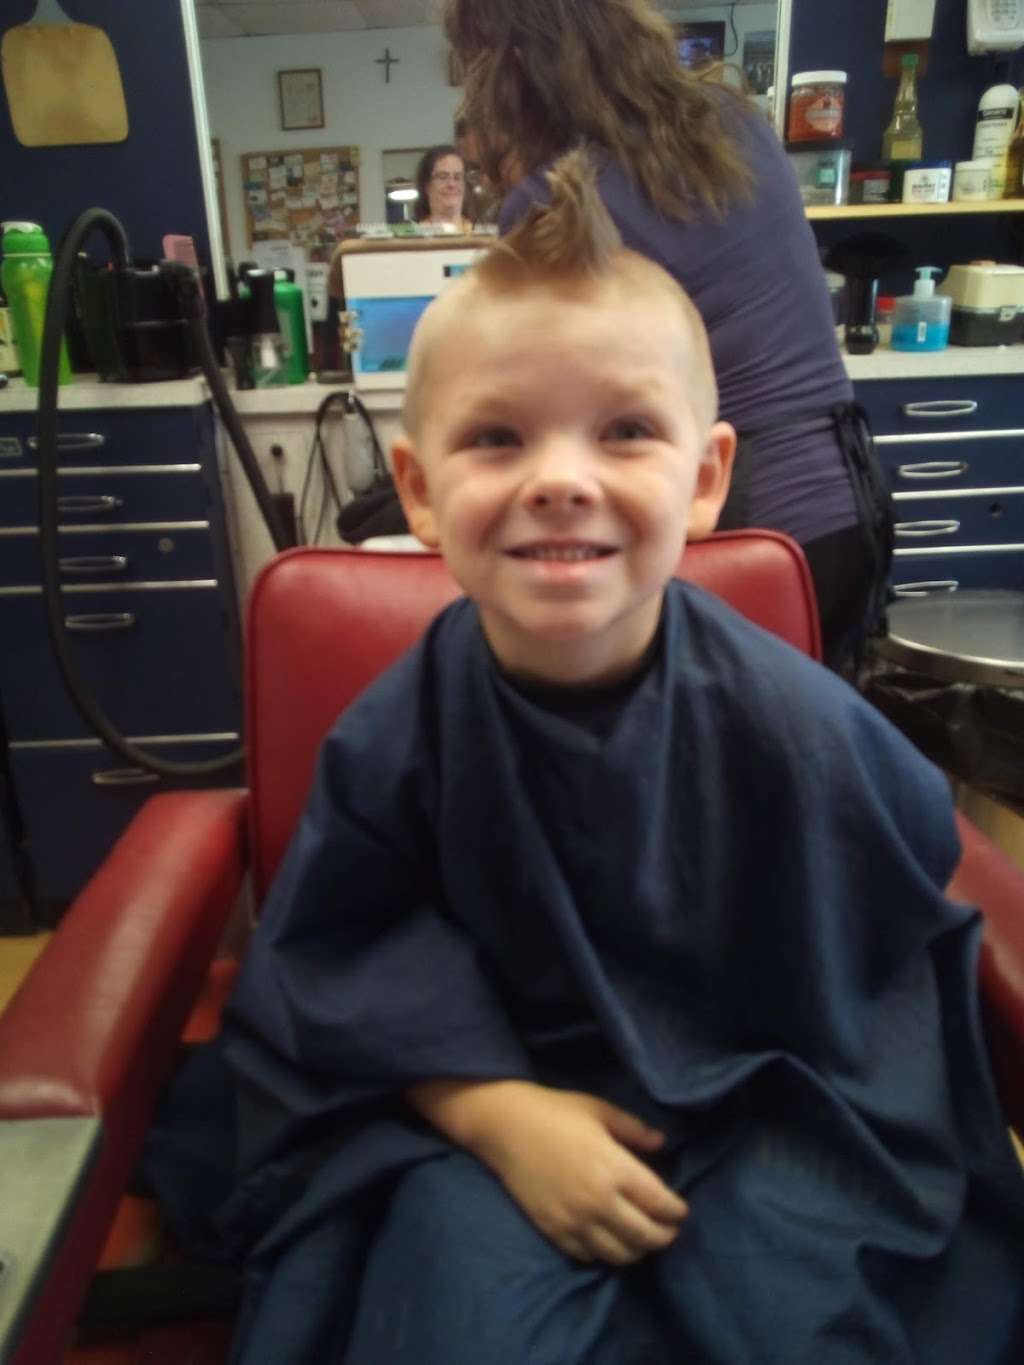 Gills Barber Shop | Photo 4 of 4 | Address: 2548 McKinley Ave, Columbus, IN 47201, USA | Phone: (812) 376-7128